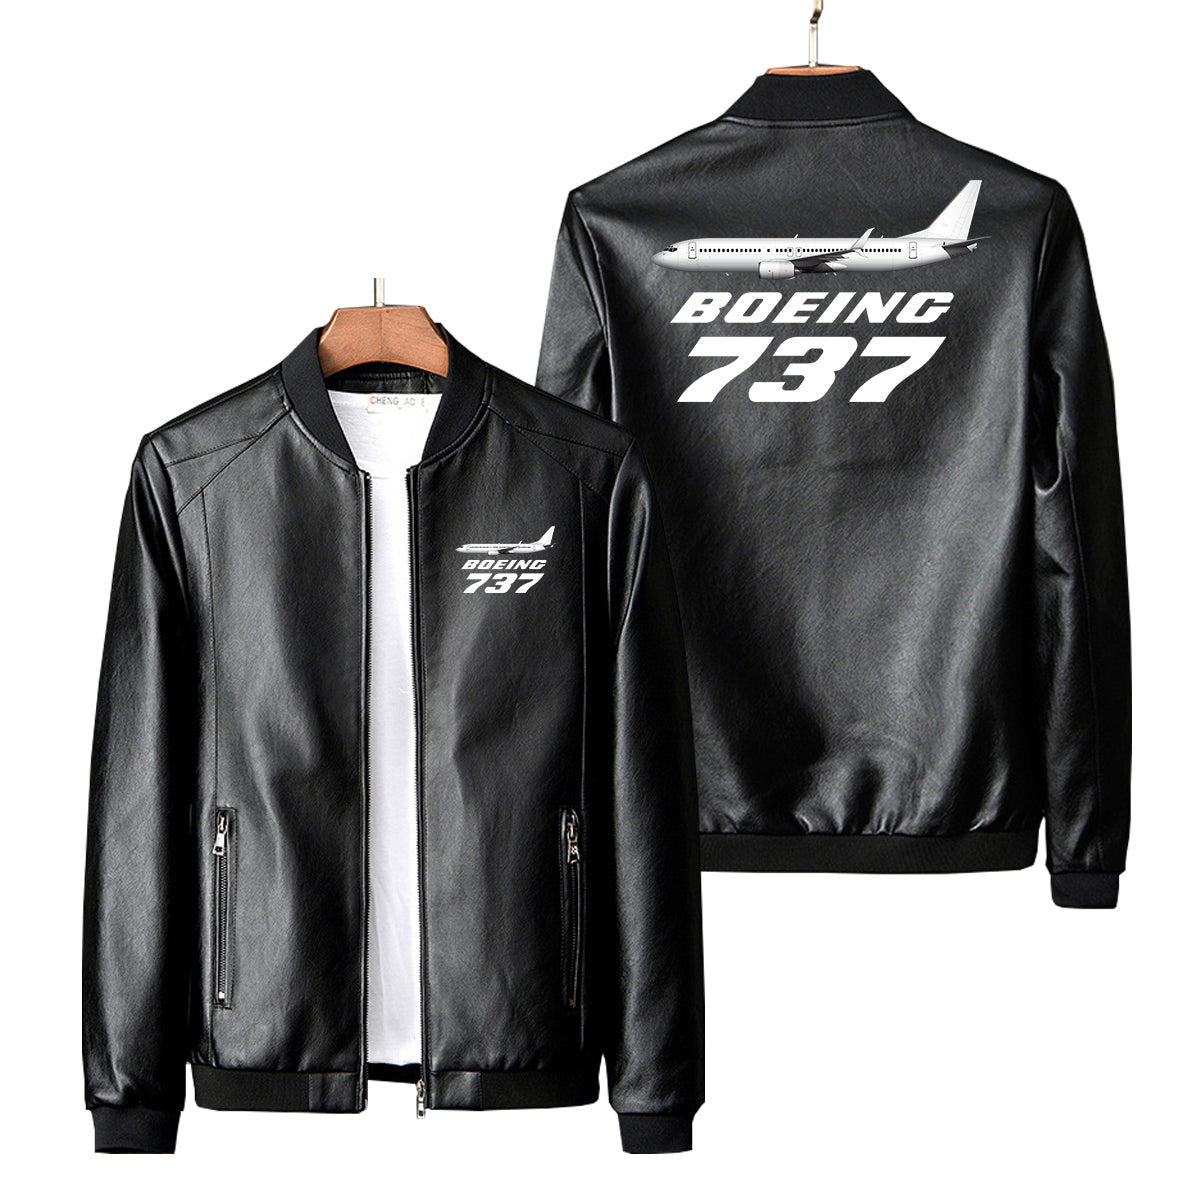 The Boeing 737 Designed PU Leather Jackets